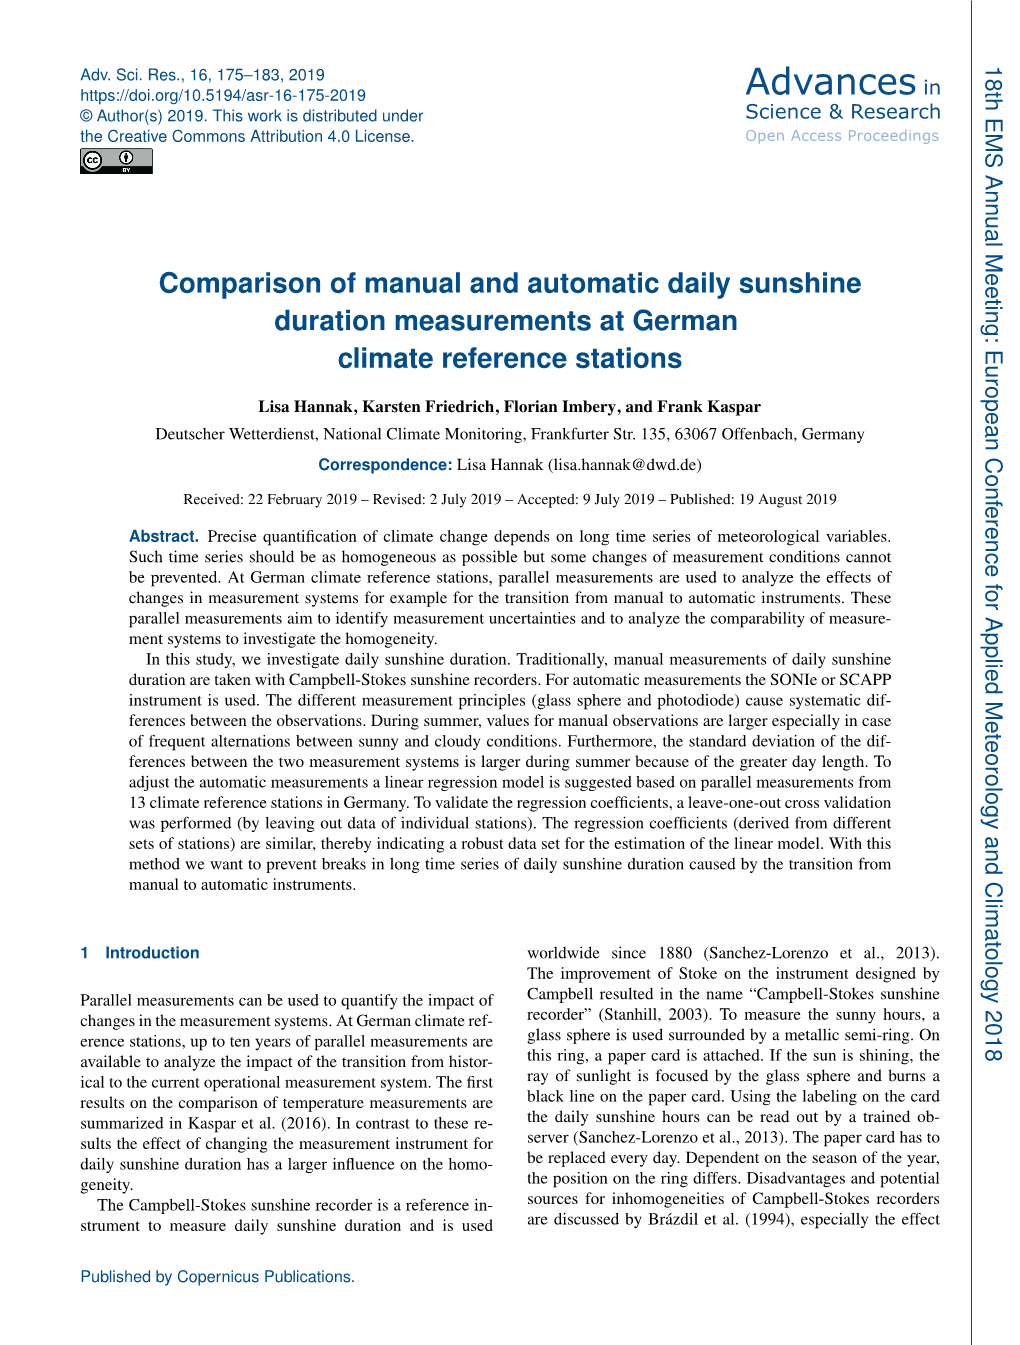 Comparison of Manual and Automatic Daily Sunshine Duration Measurements at German Climate Reference Stations